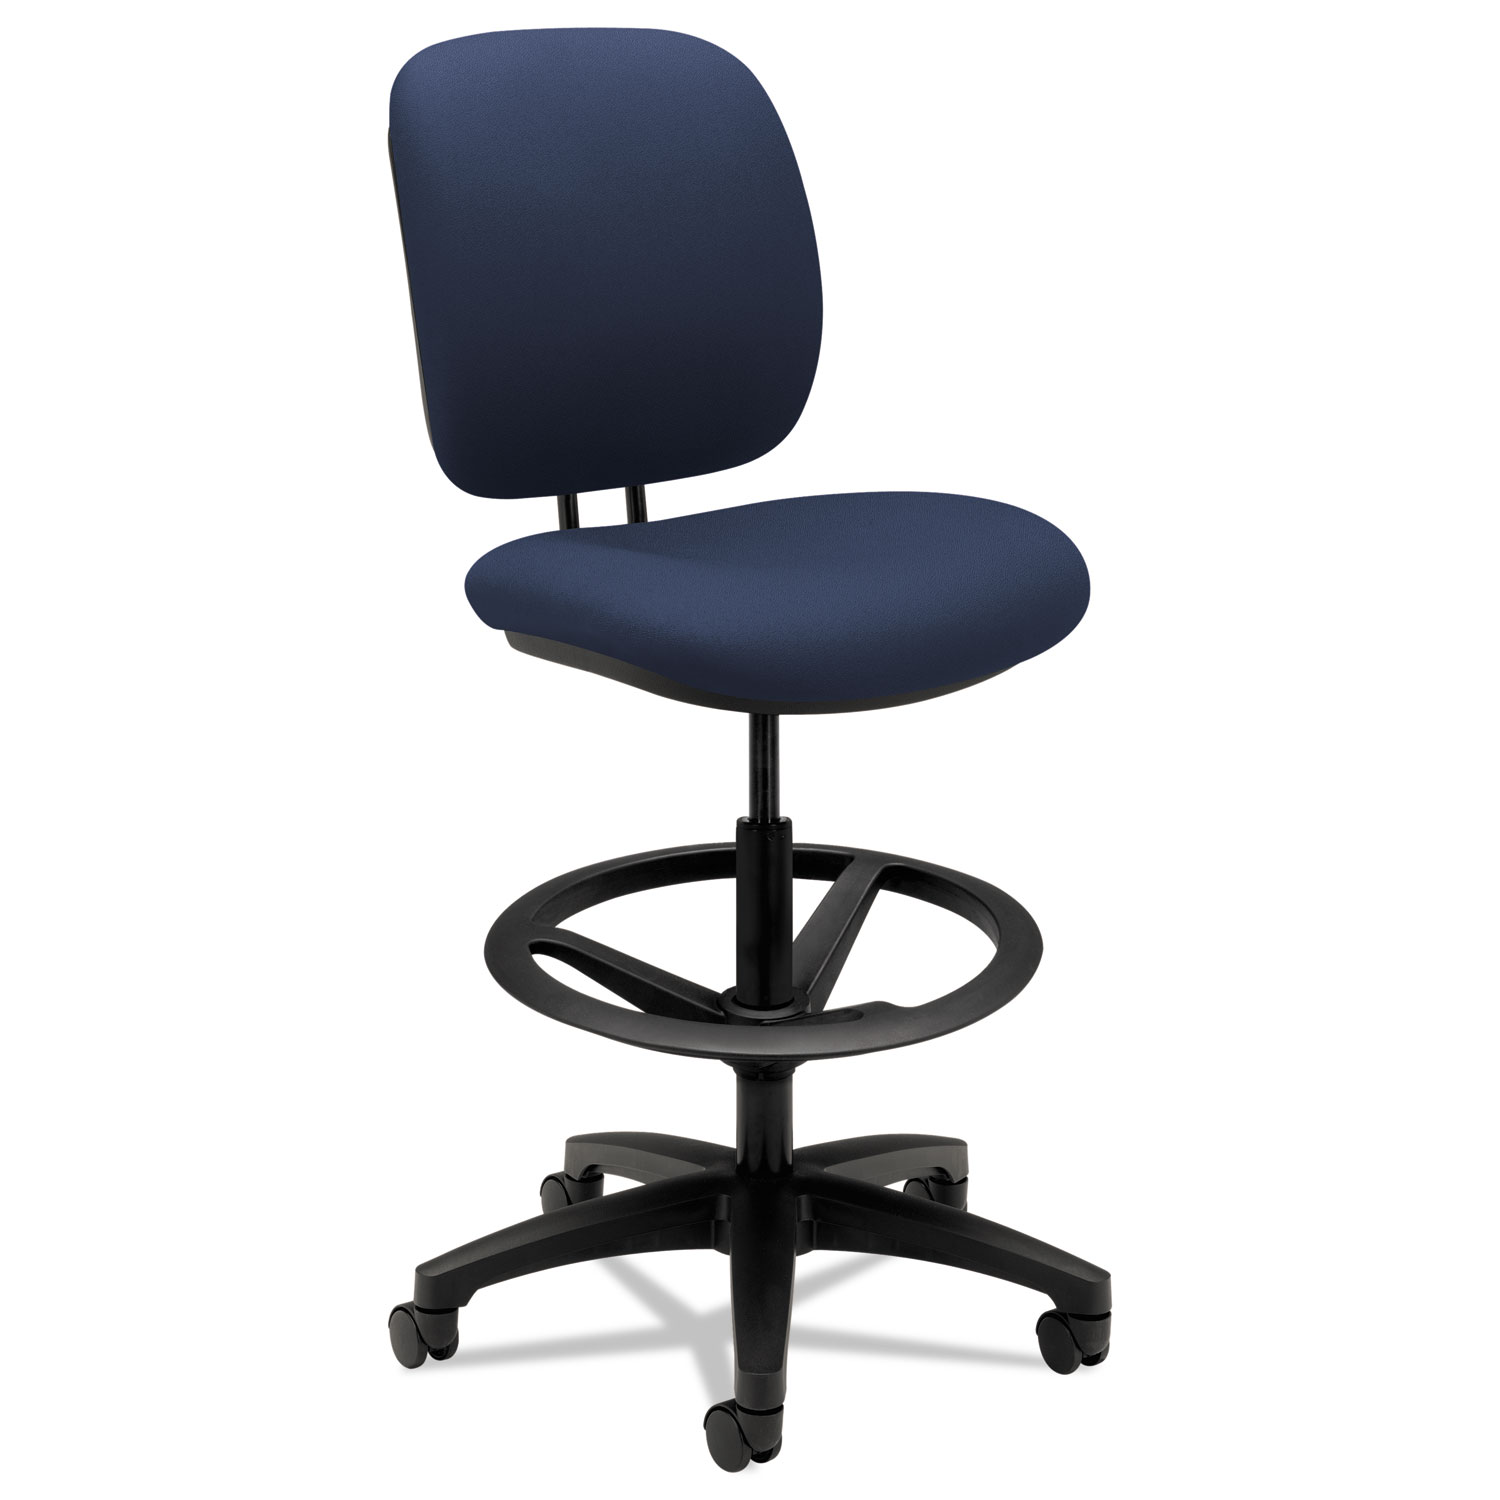  HON H5905.H.CU98.T ComforTask Task Stool with Adjustable Footring, 32 Seat Height, Supports up to 300 lbs, Navy Seat/Back, Black Base (HON5905CU98T) 